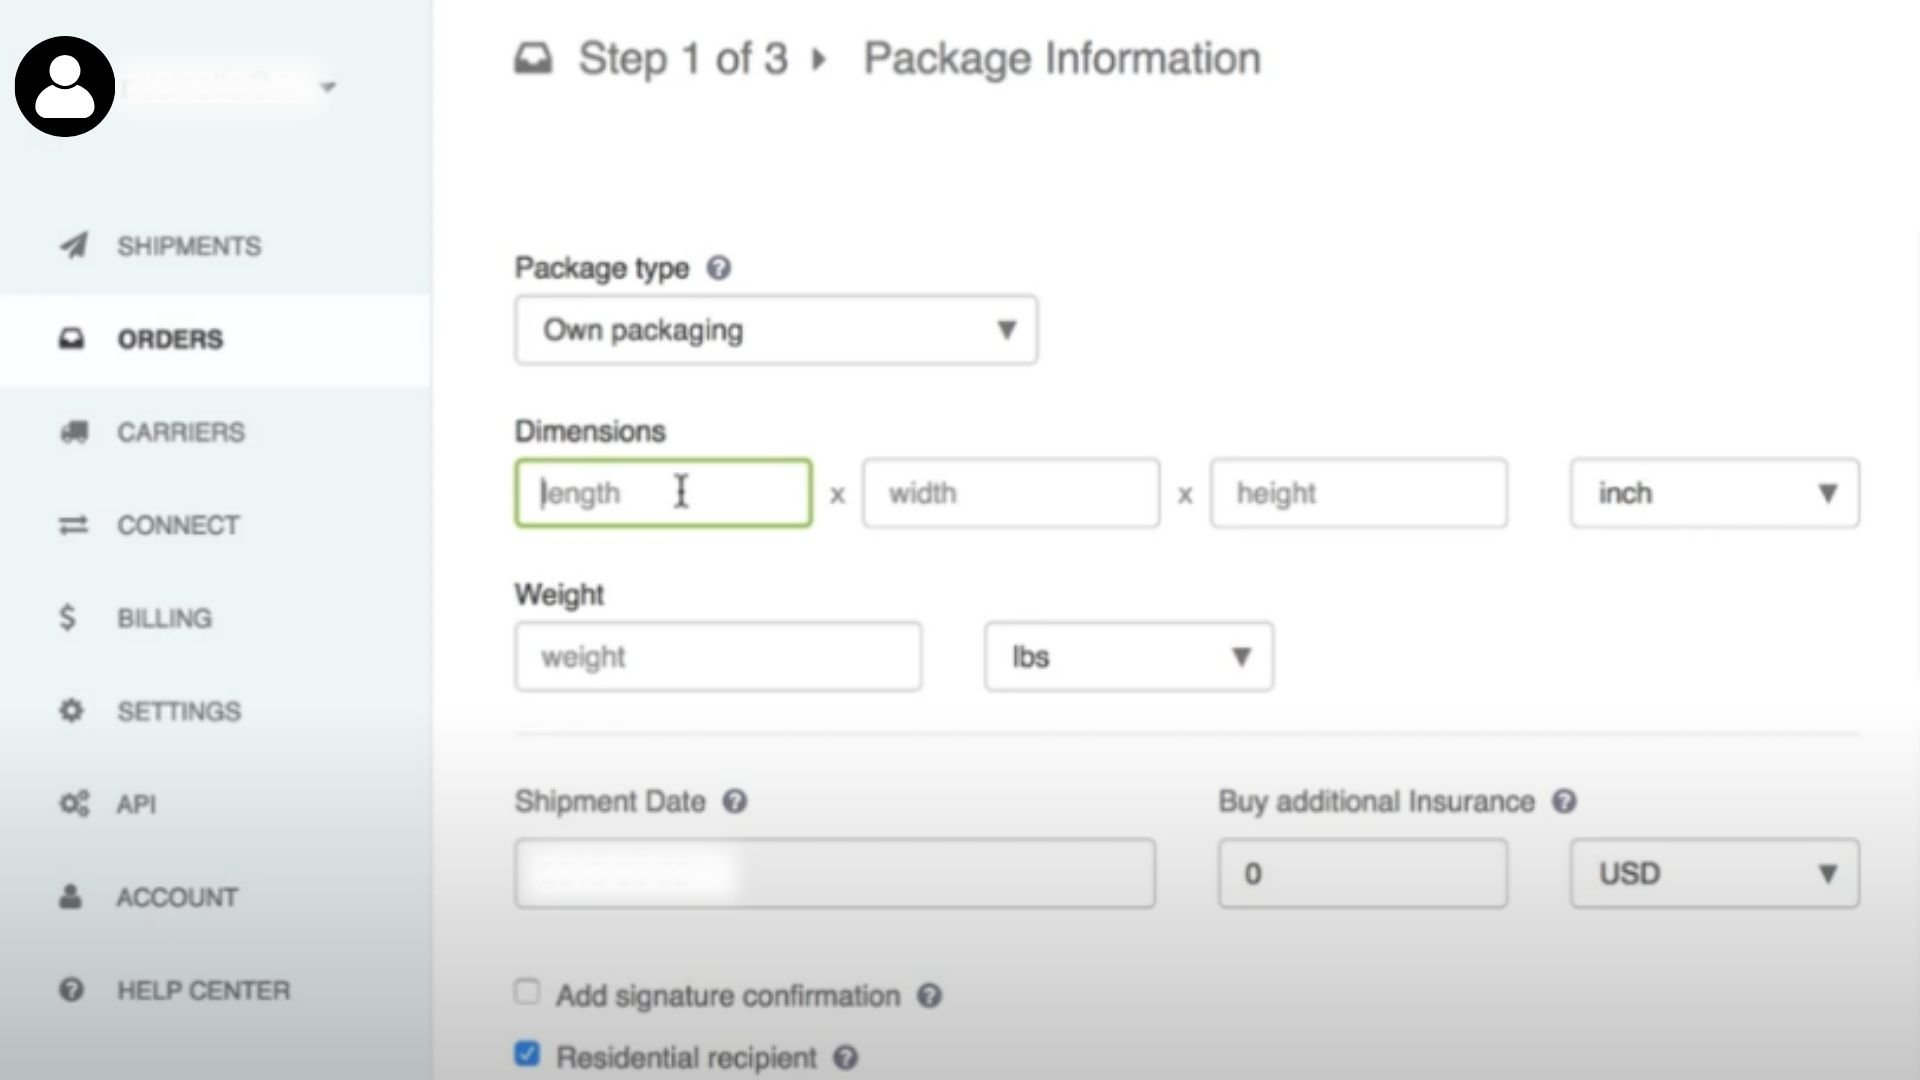 How to Print Shipping Labels on Shippo